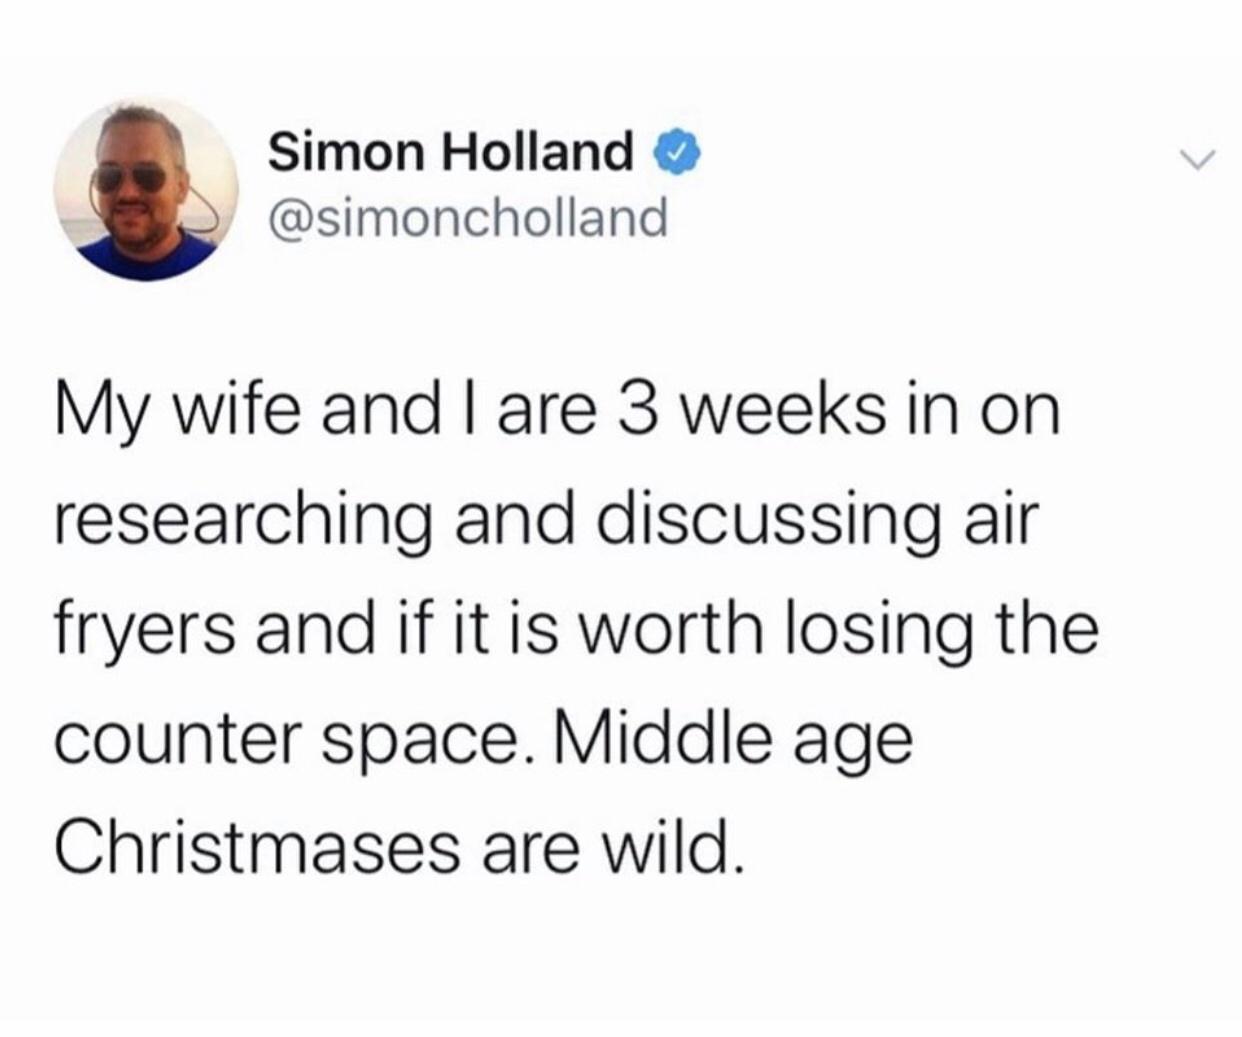 instagram post about gender equality - Simon Holland My wife and I are 3 weeks in on researching and discussing air fryers and if it is worth losing the counter space. Middle age Christmases are wild.